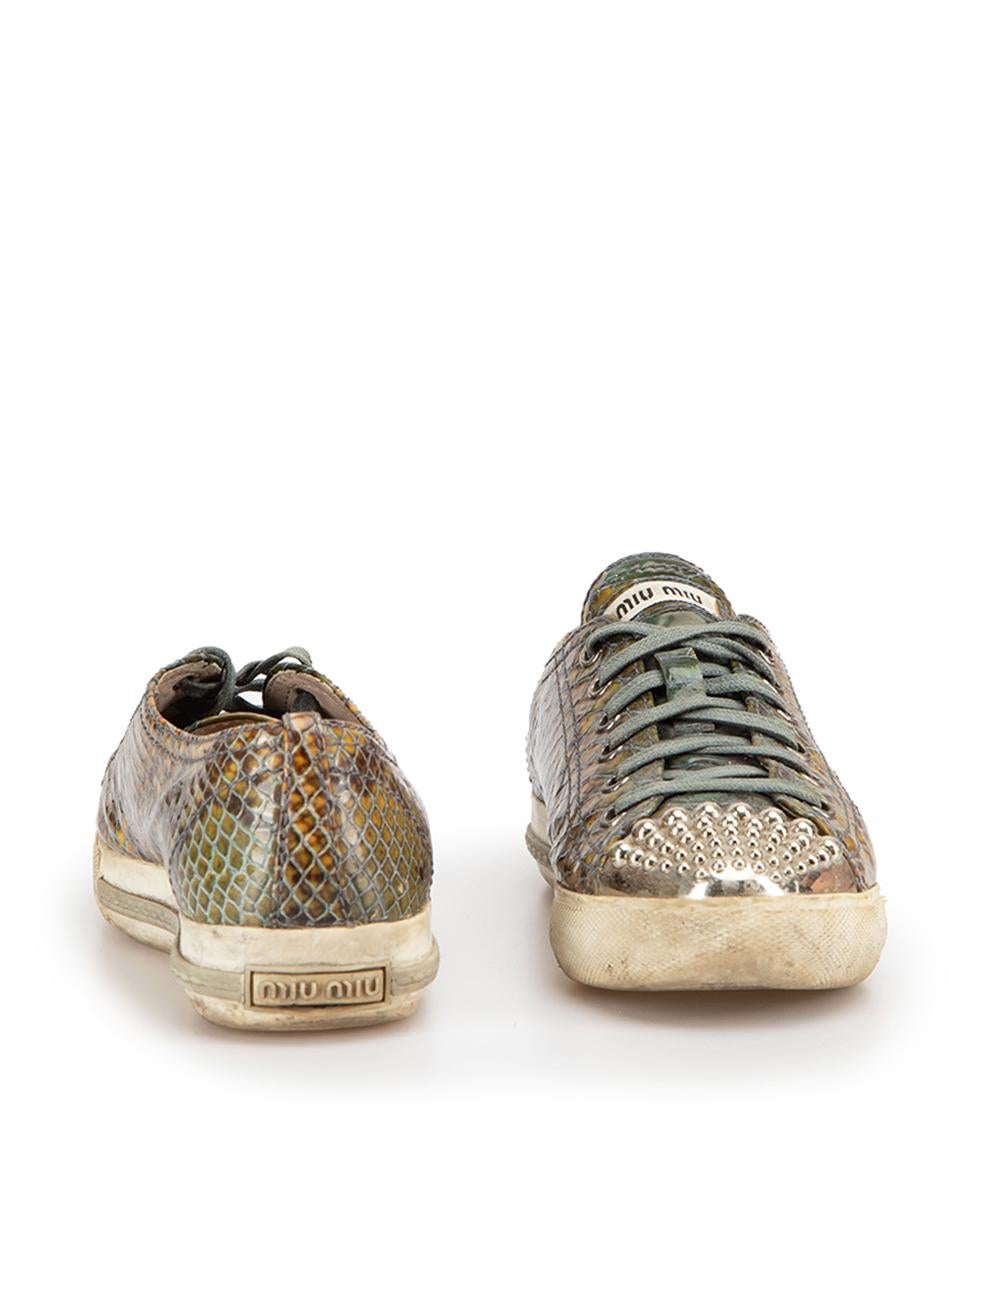 Miu Miu Women's Green Leather Lizard-Effect Embellished Cap-Toe Low Trainers In Good Condition For Sale In London, GB